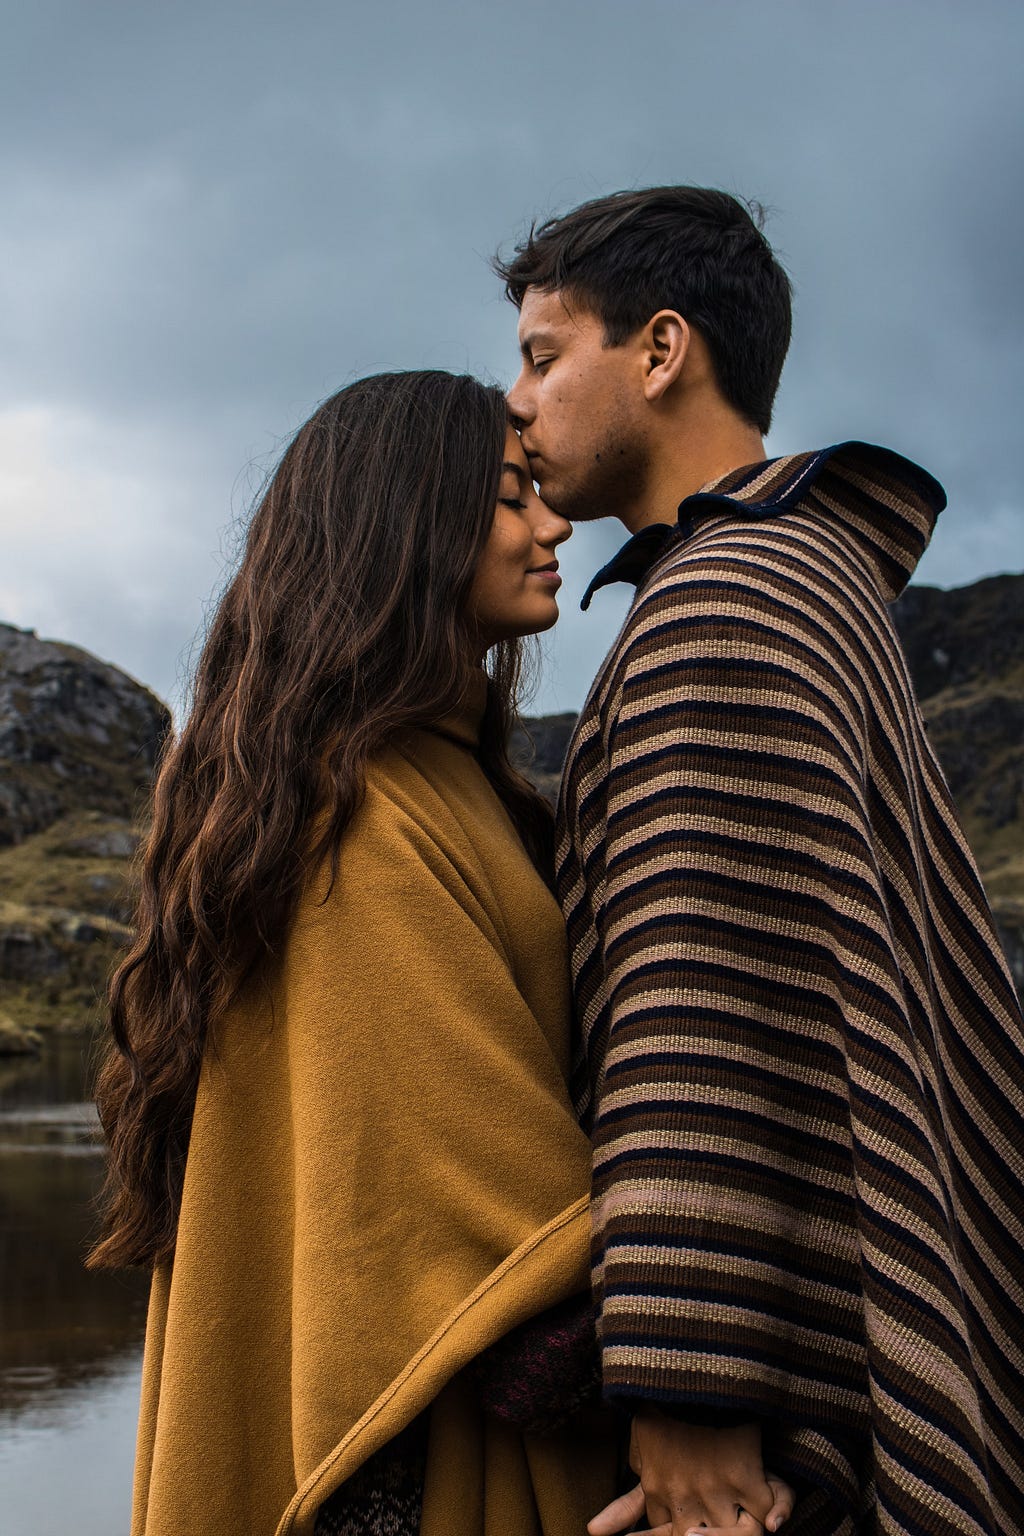 Photo of two young people with brown skin & dark hair, standing close, facing each other with eyes closed. Her face is smiling. She slightly tilts her head up. Her forehead meets his lips as he kisses her. She wears a mustard yellow-brown cloth poncho, and he wears a brown-tone, striped cloth poncho. They hold hands, with their arms down, only slightly visible under the ponchos. The calm water, and rocky, green mountains are in the background, andthe blue sky is spotted with white clouds.